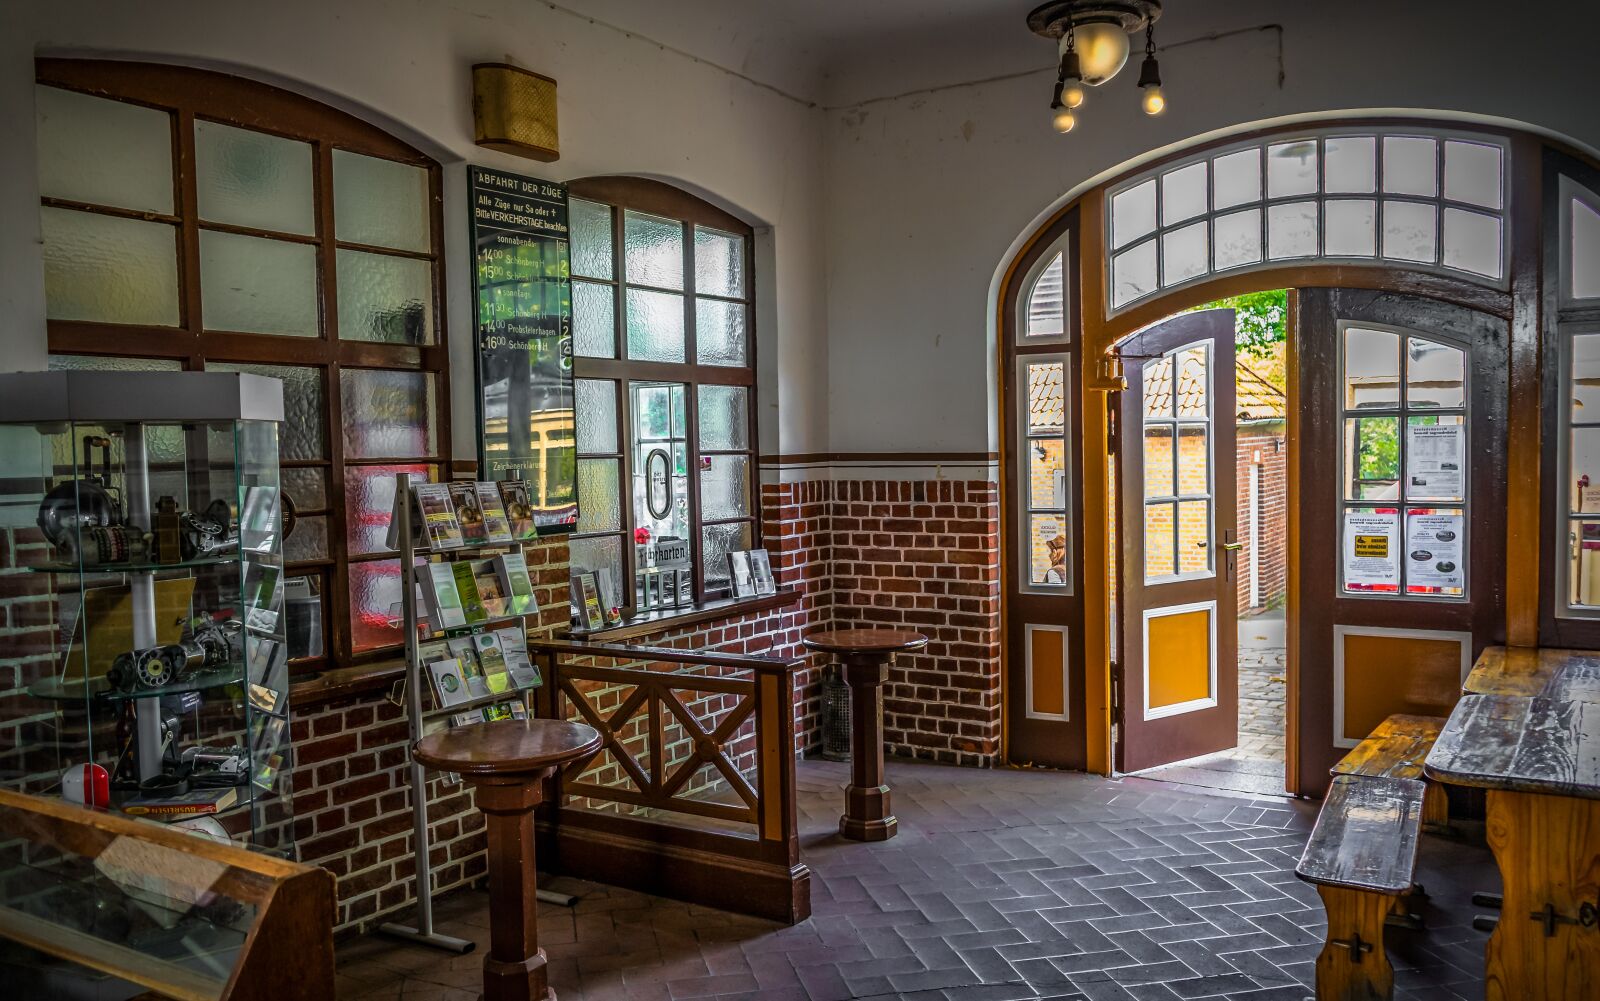 Sony a7 II sample photo. Railway station, porch, the photography